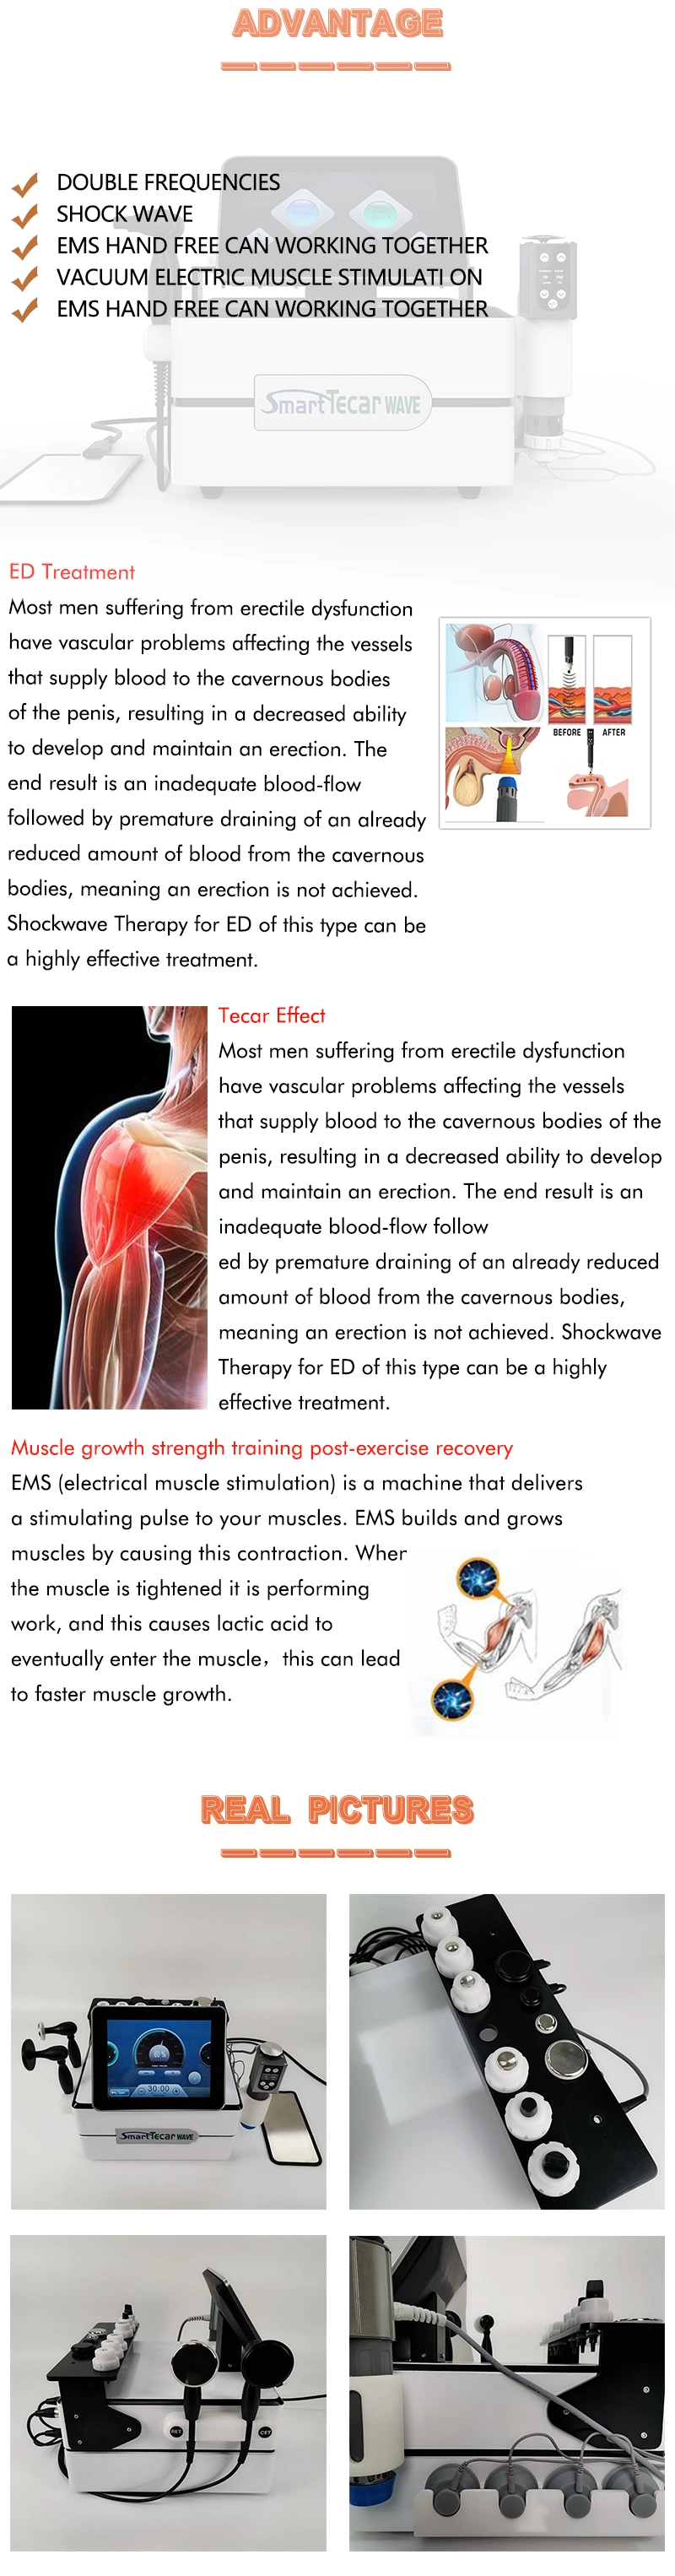 Stock Available 3 in 1 Shockwave Tecar EMS Smart Tecar Wave 448kHz Cet Ret Tecar Physical Therapy Machine Rehabilitation Therapy